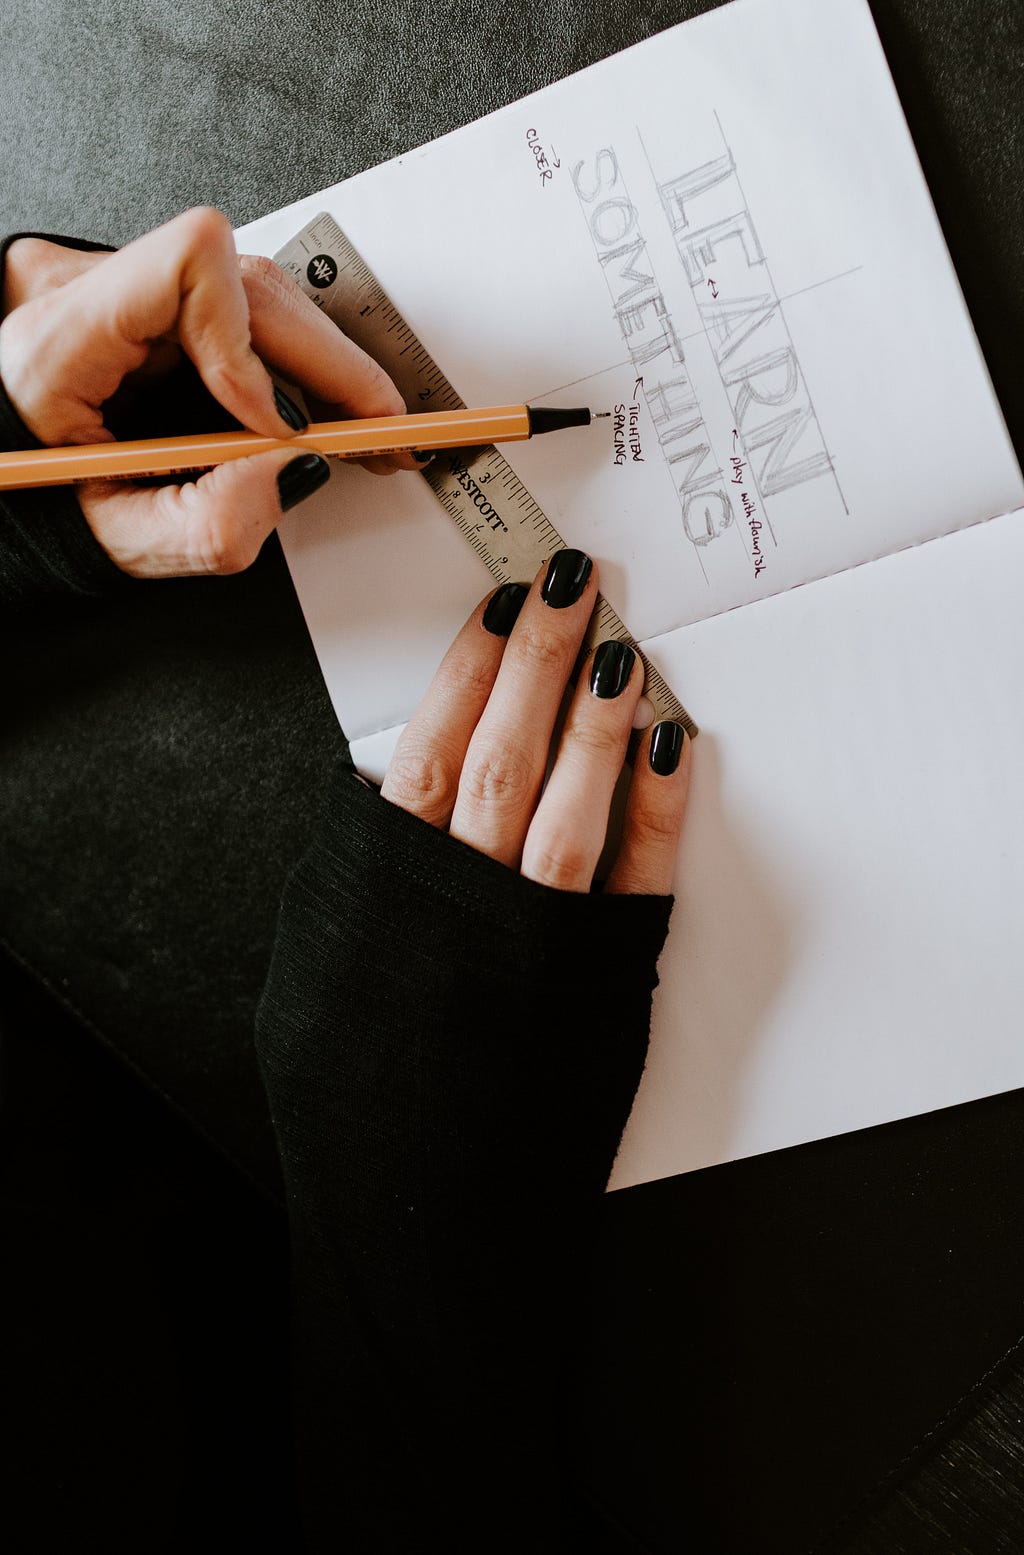 A designer uses a ruler to make visual design notes on a sketch. The sketch says “LEARN SOMETHING,” in uppercase block letters.